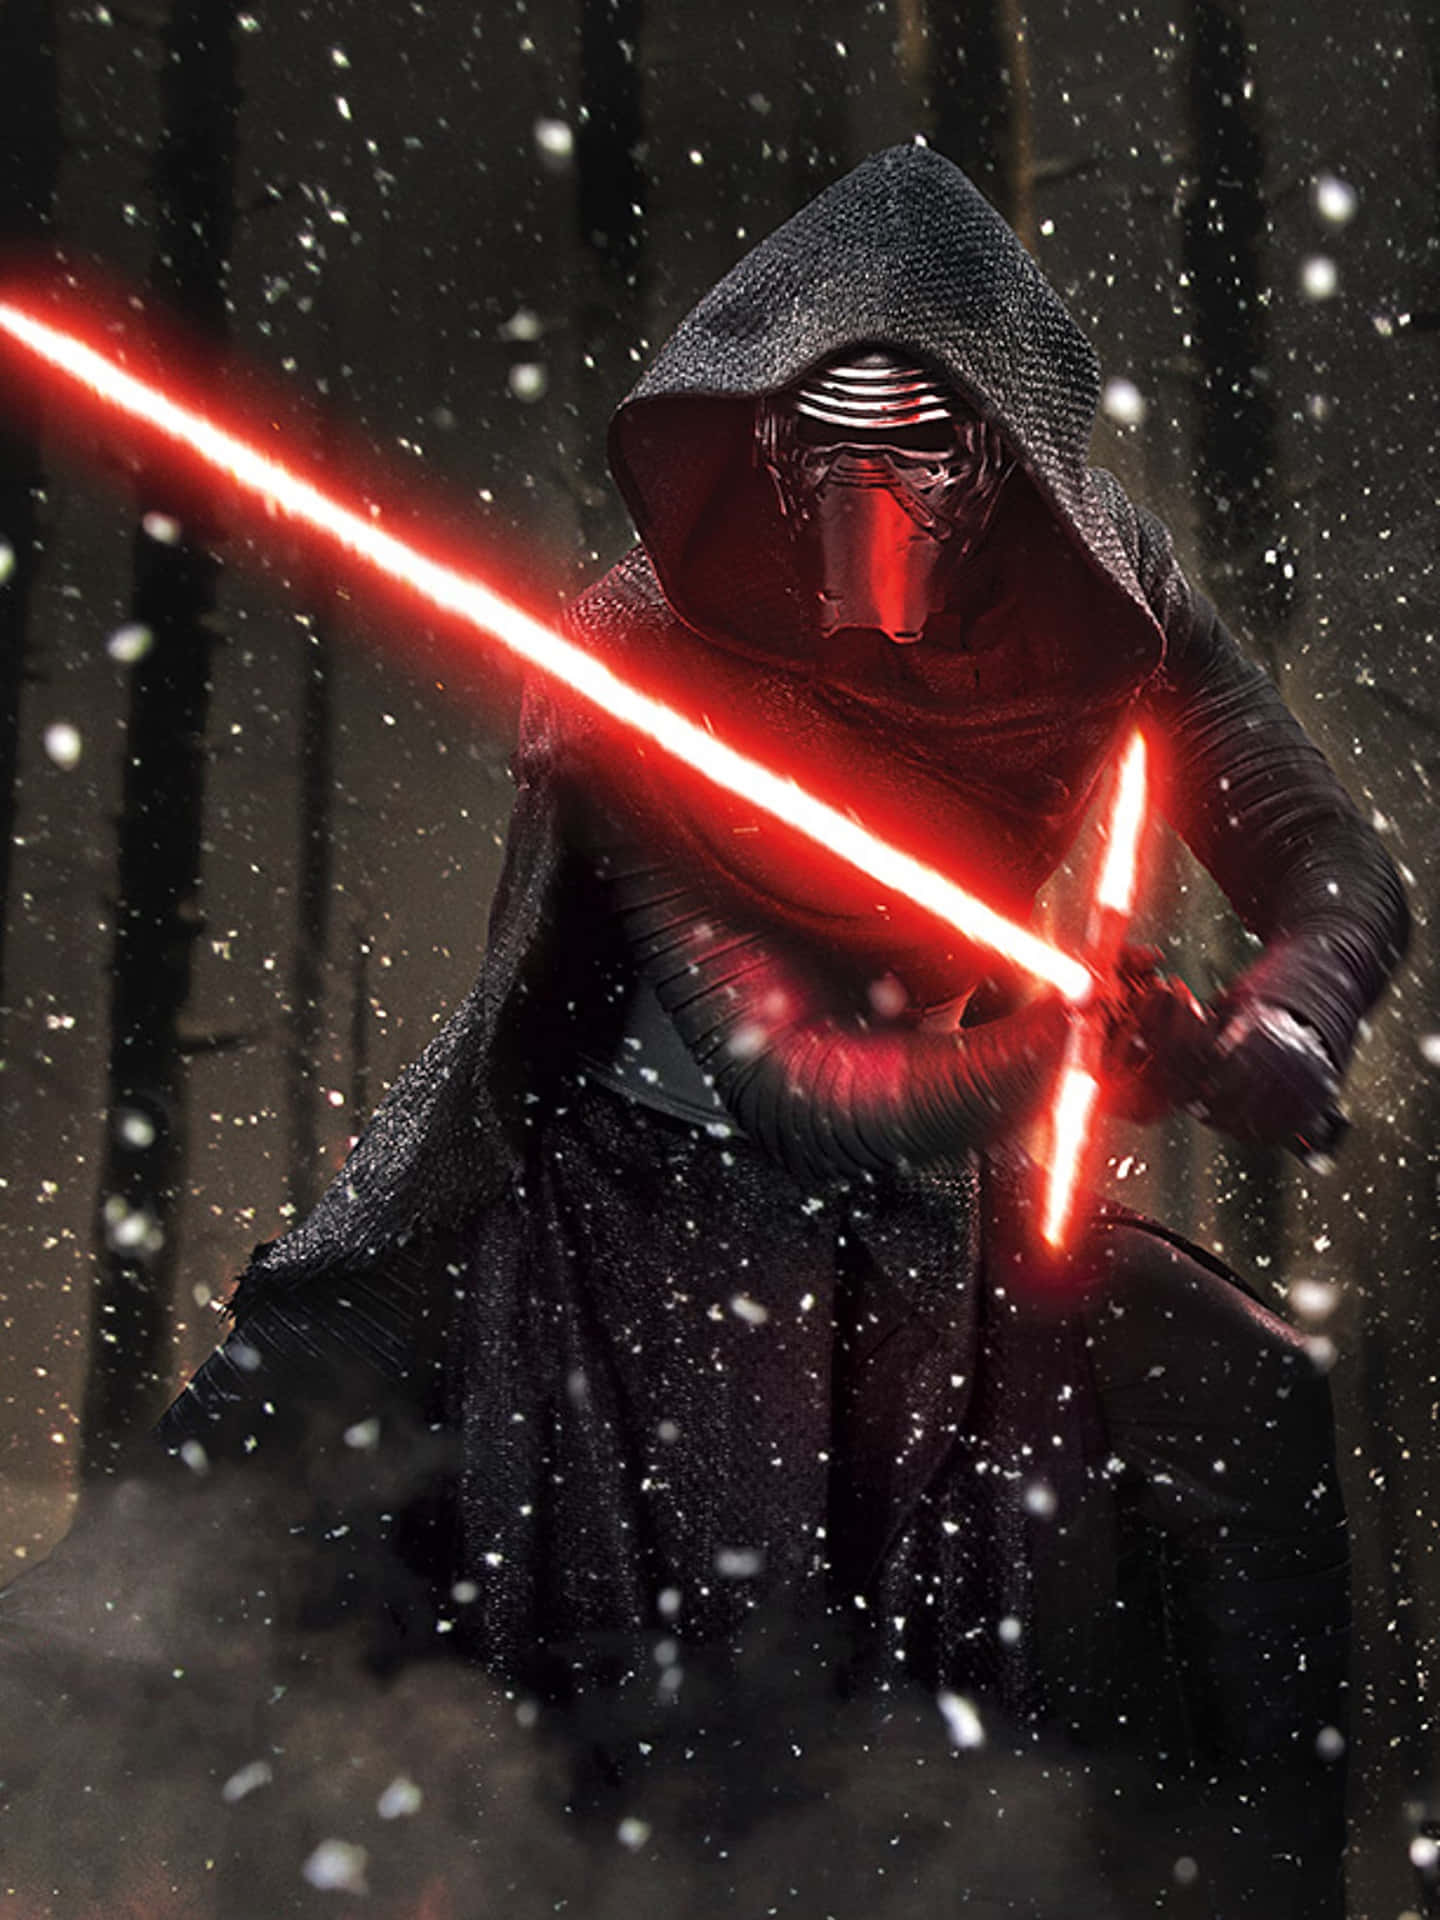 Dark side of the force, textured artwork of Kylo Ren on an Iphone. Wallpaper